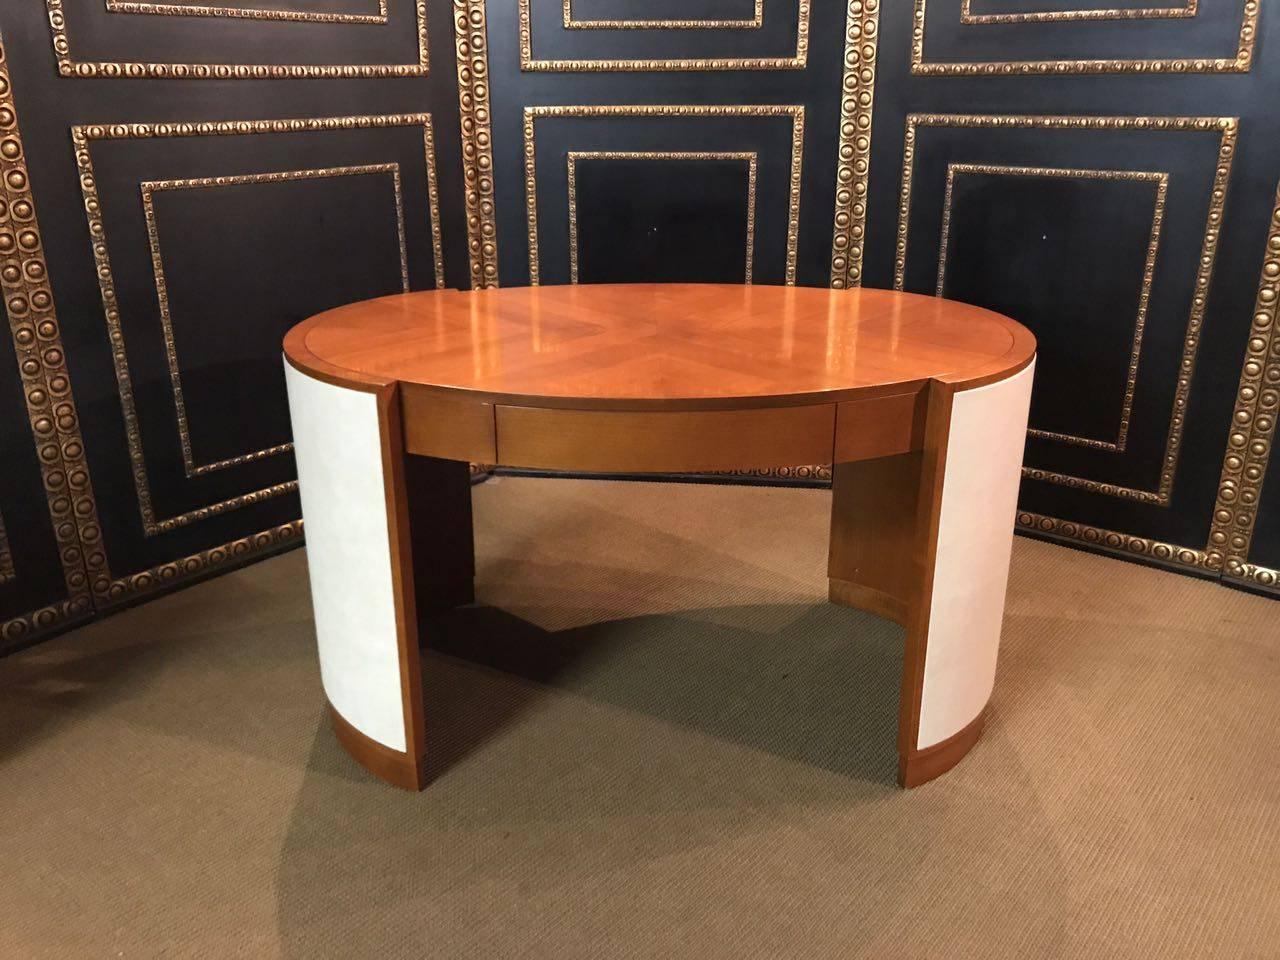 Beautiful curved shape.
The sides are covered with genuine leather.
Wood is cherry tree with a drawer.
From the Nobel company Selva made in Italy.